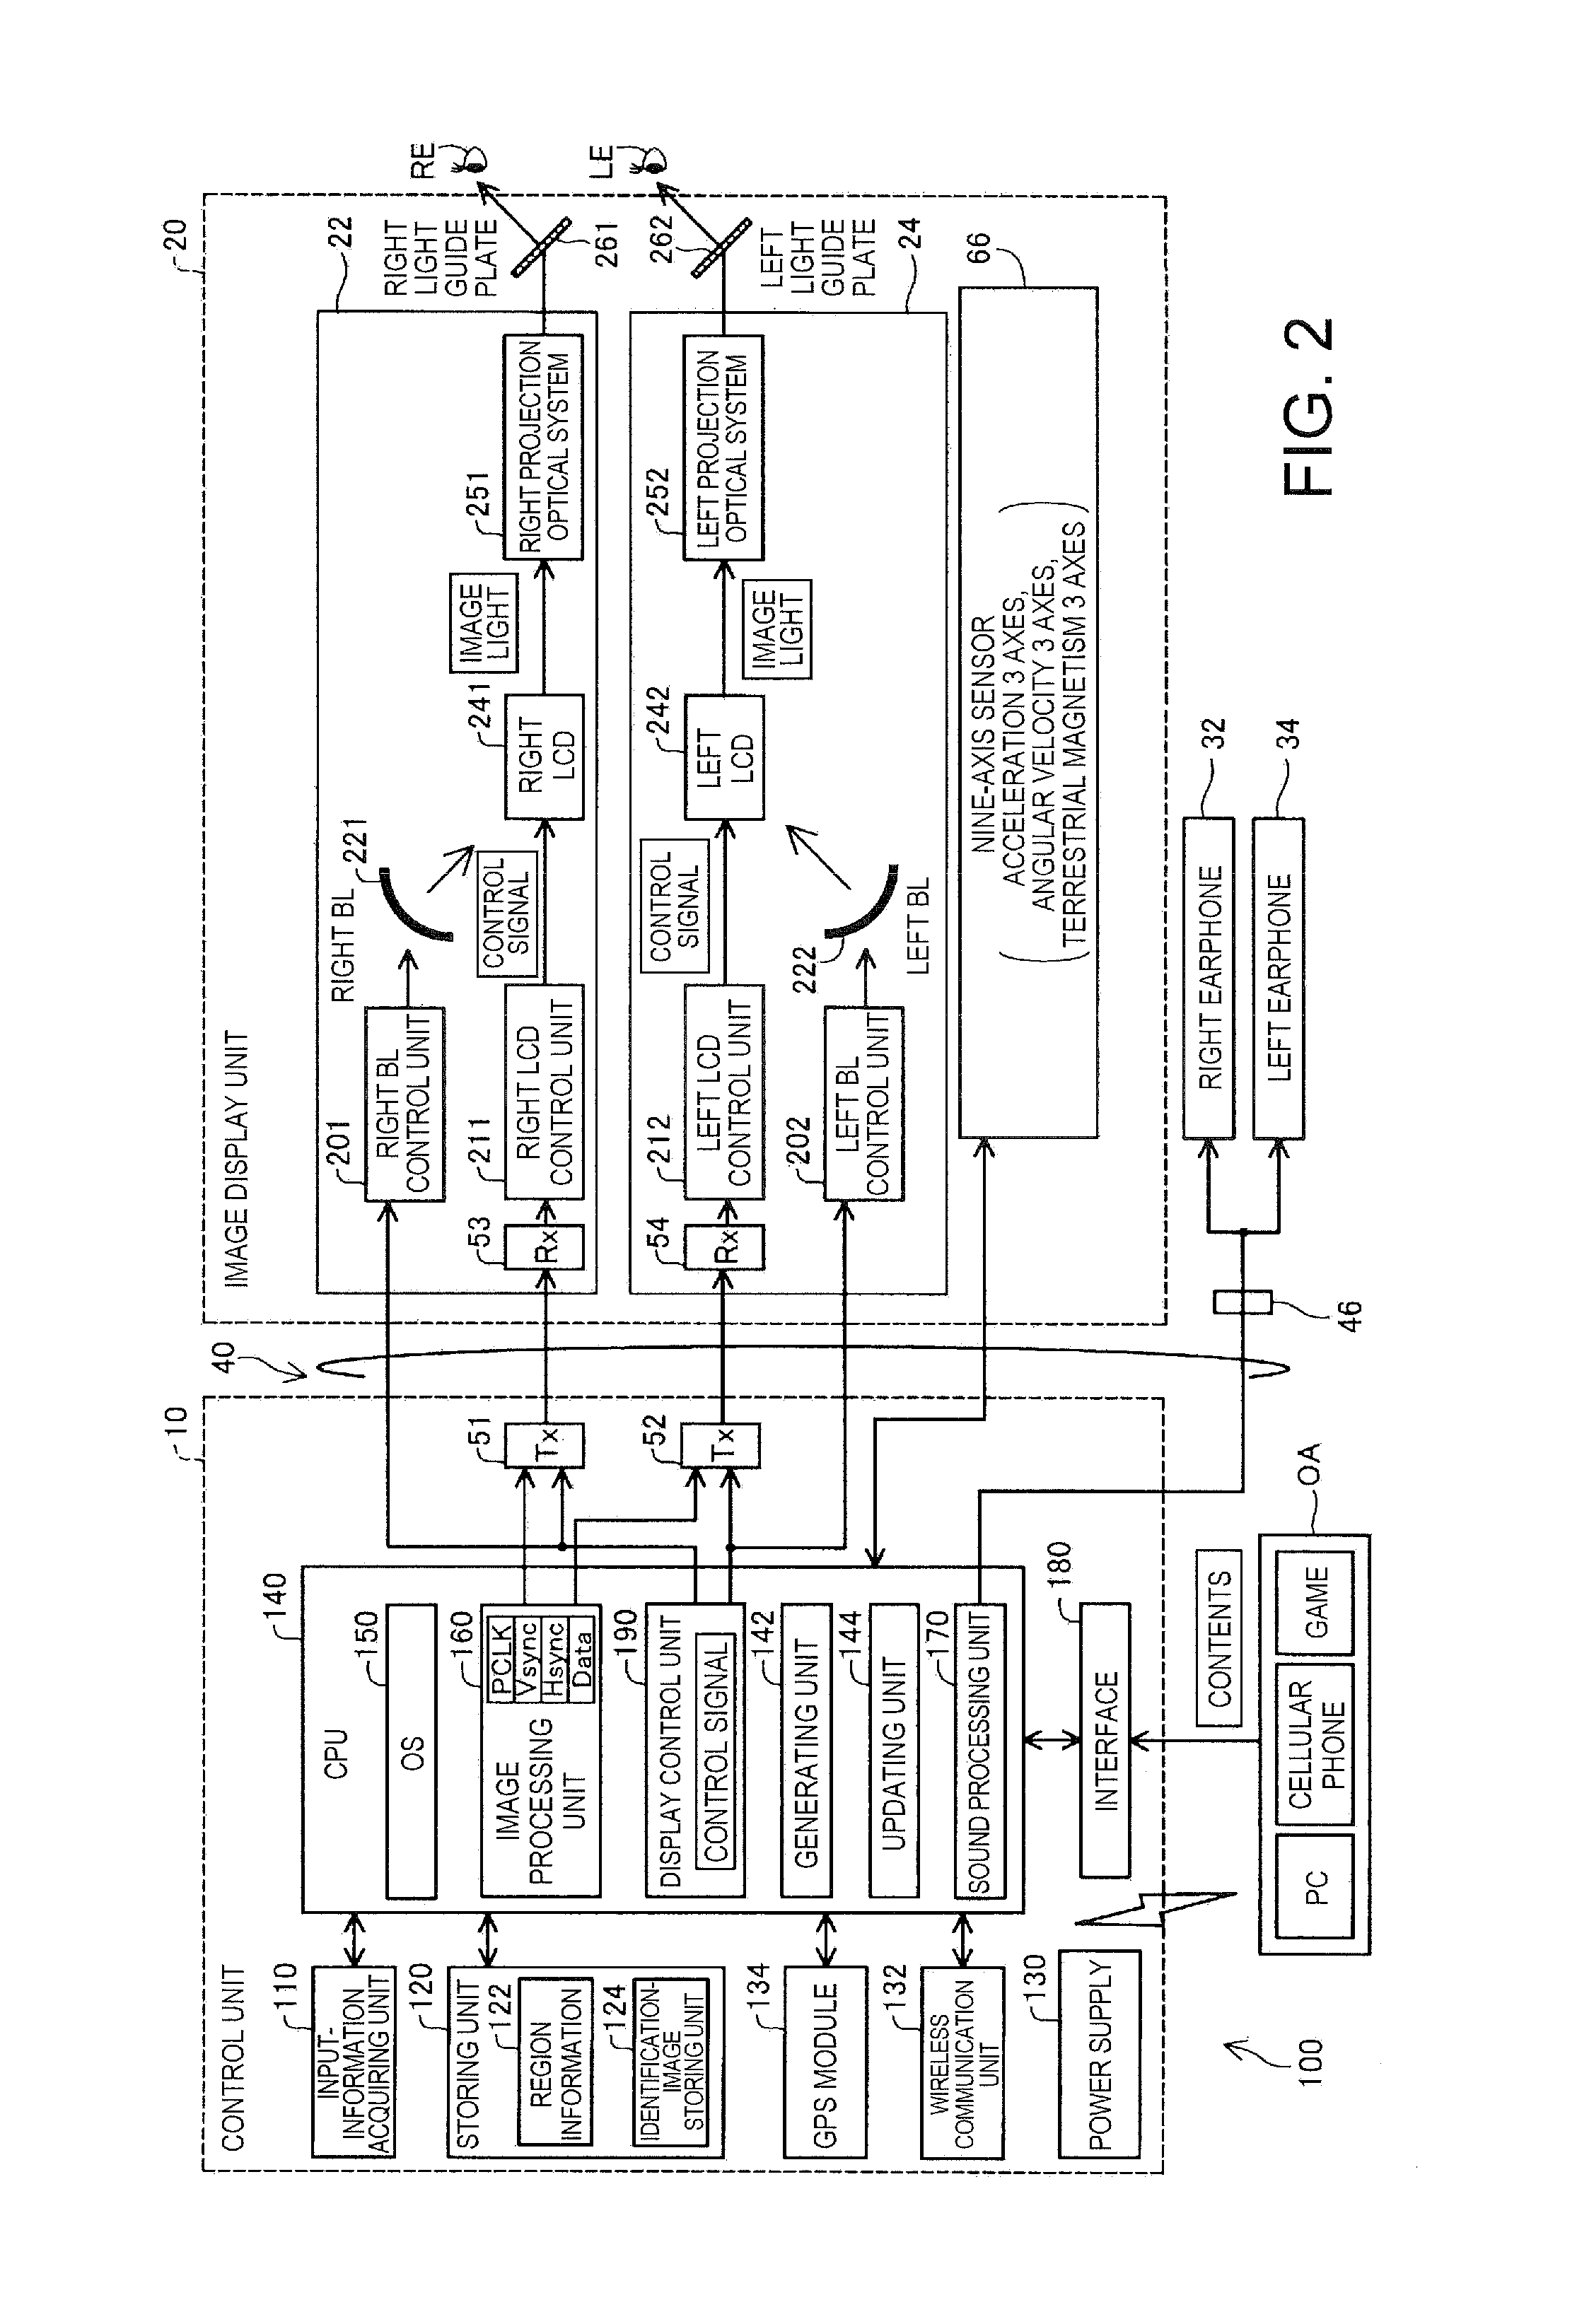 Image display device, method of controlling image display device, computer program, and image display system